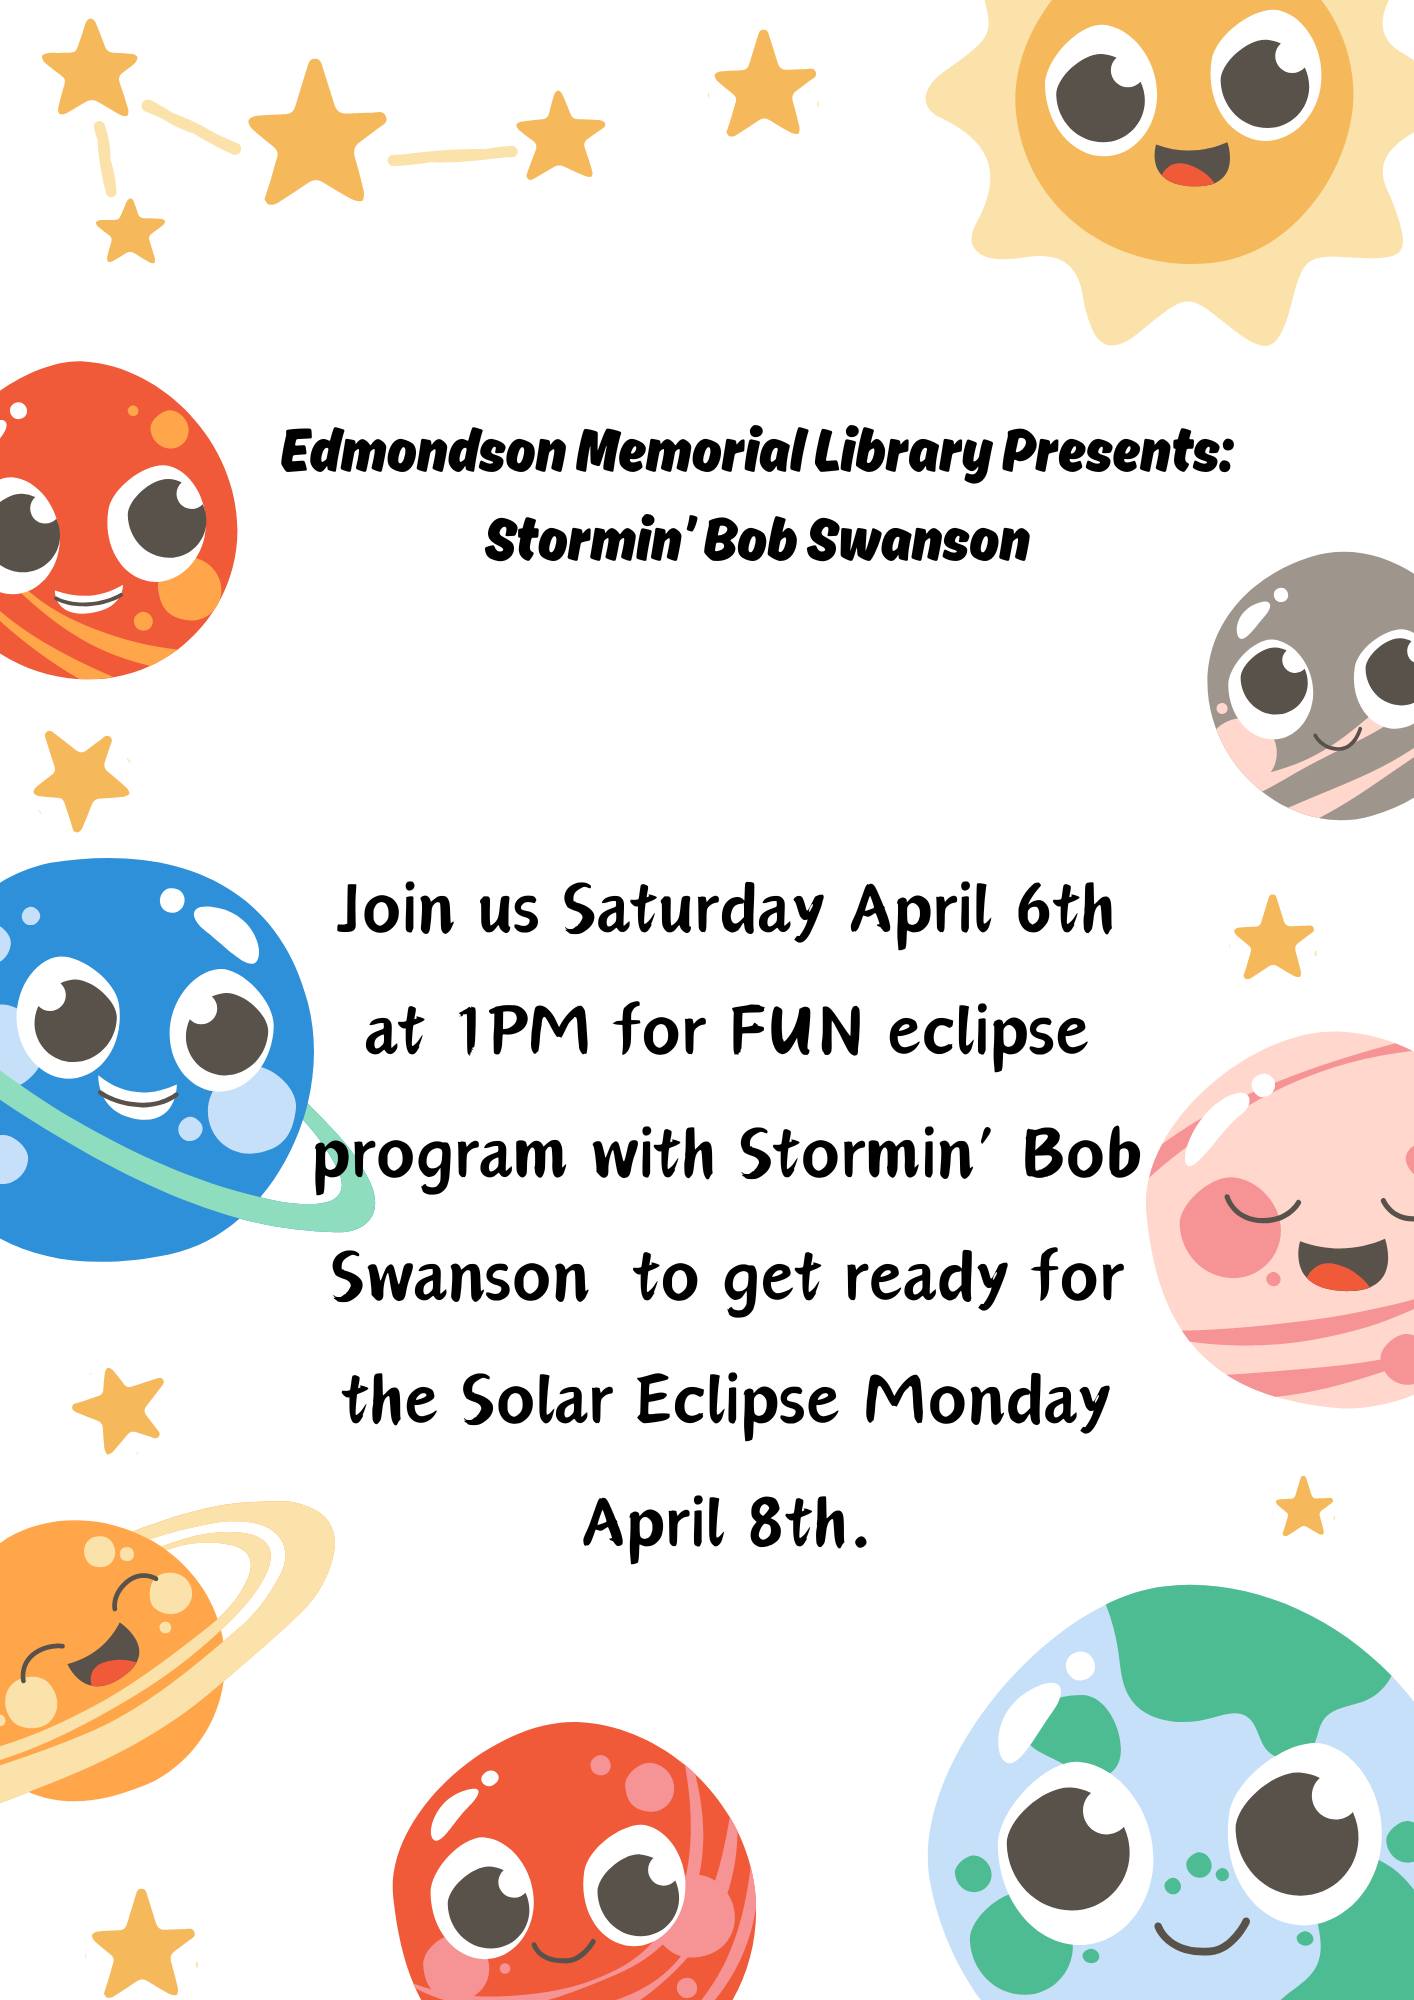 Edmondson Memorial Library presents: Stormin' Bob Swanson. Join us Saturday, April 6th at 1 PM for FUN eclipse program with Stormin' Bob Swanson to get ready for the Solar Eclipse on Monday April 8th. 